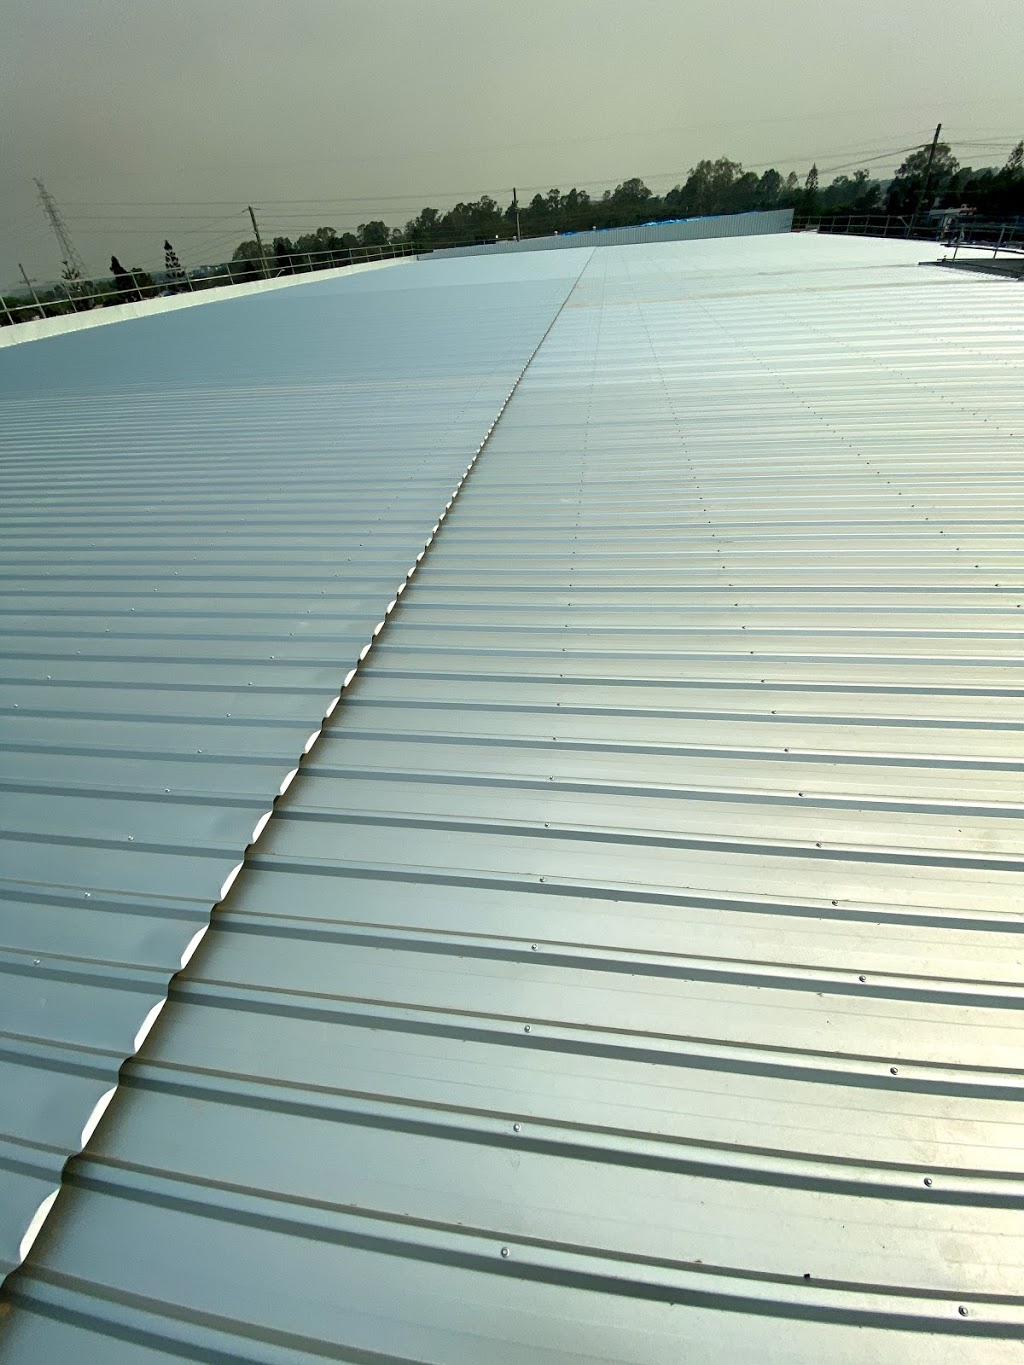 Elevated Metal Roofing Services | roofing contractor | 12 Camena St, Shailer Park QLD 4128, Australia | 0468406012 OR +61 468 406 012